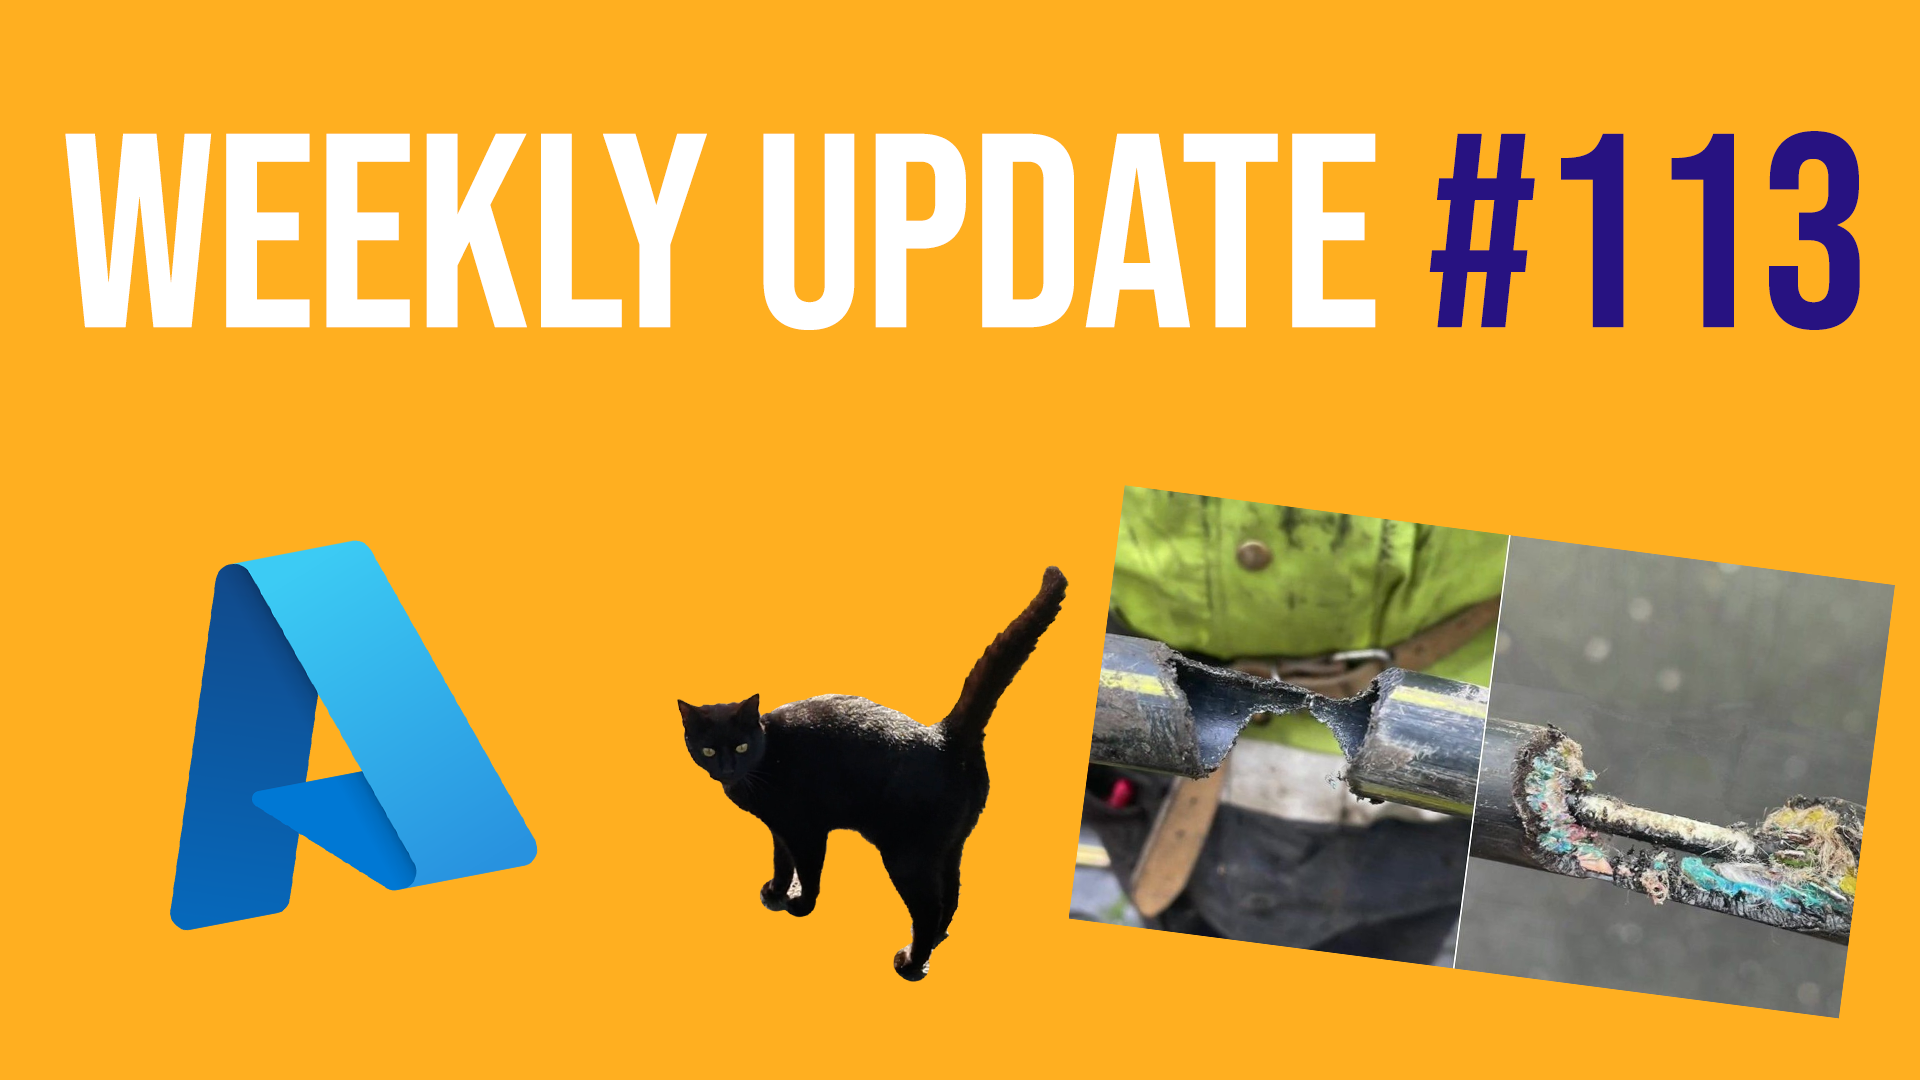 Weekly Update #113 - Quiet on the Azure front, new Google phone and rats chewing through broadband!